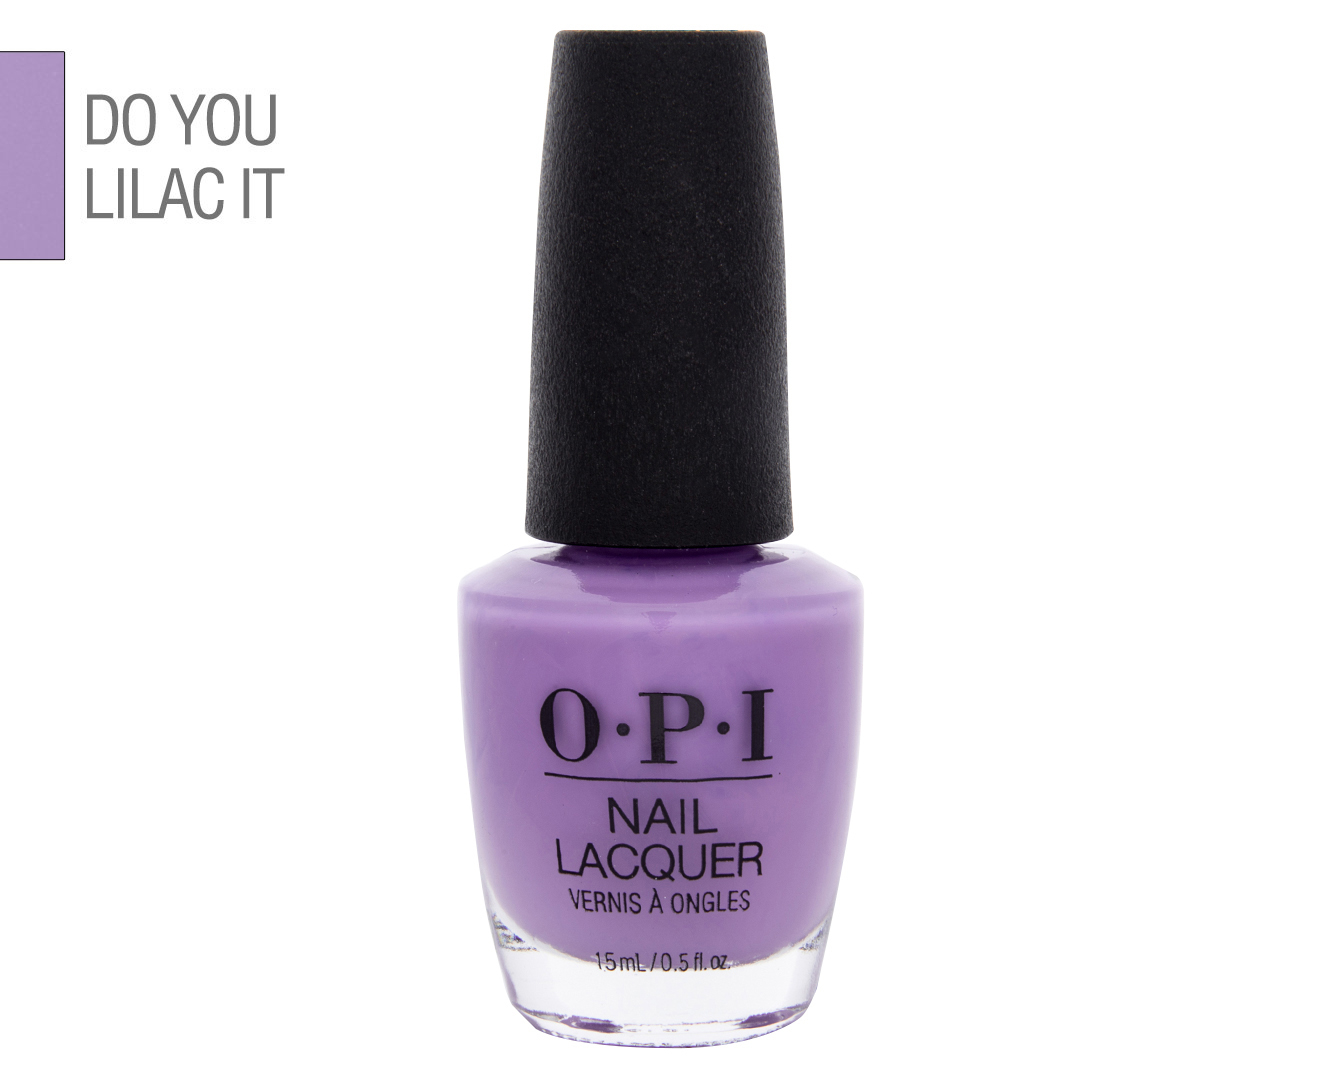 OPI Nail Lacquer, Sheer Pale Lilac Color - wide 11